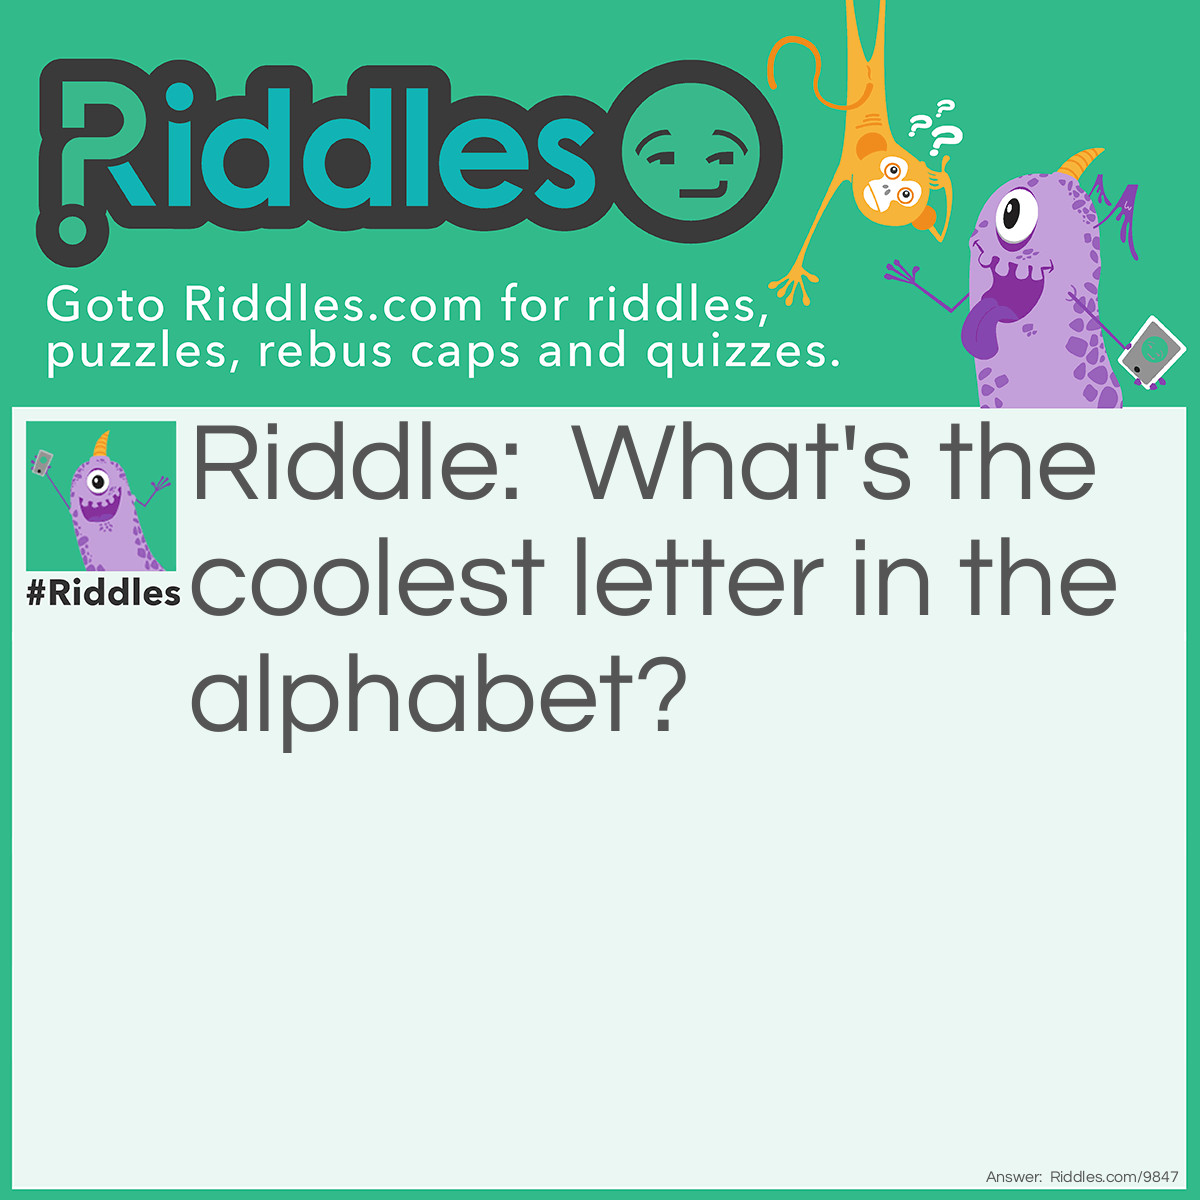 Riddle: What's the coolest letter in the alphabet? Answer: The letter B. It’s surrounded by AC.